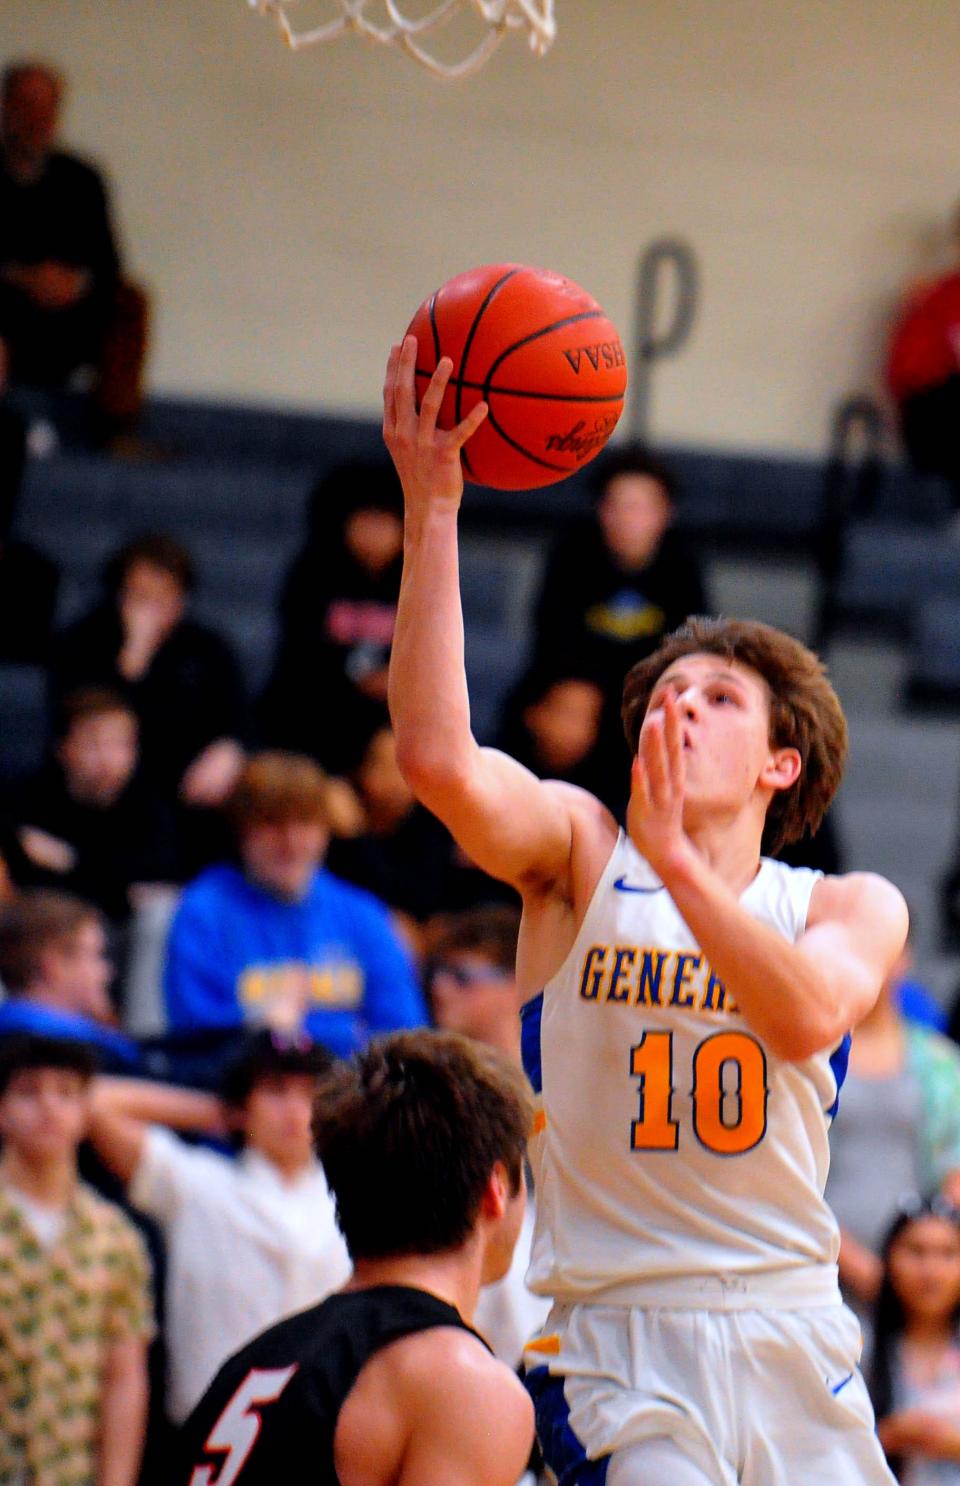 Wooster's Brady Bowen drives to the hoop.